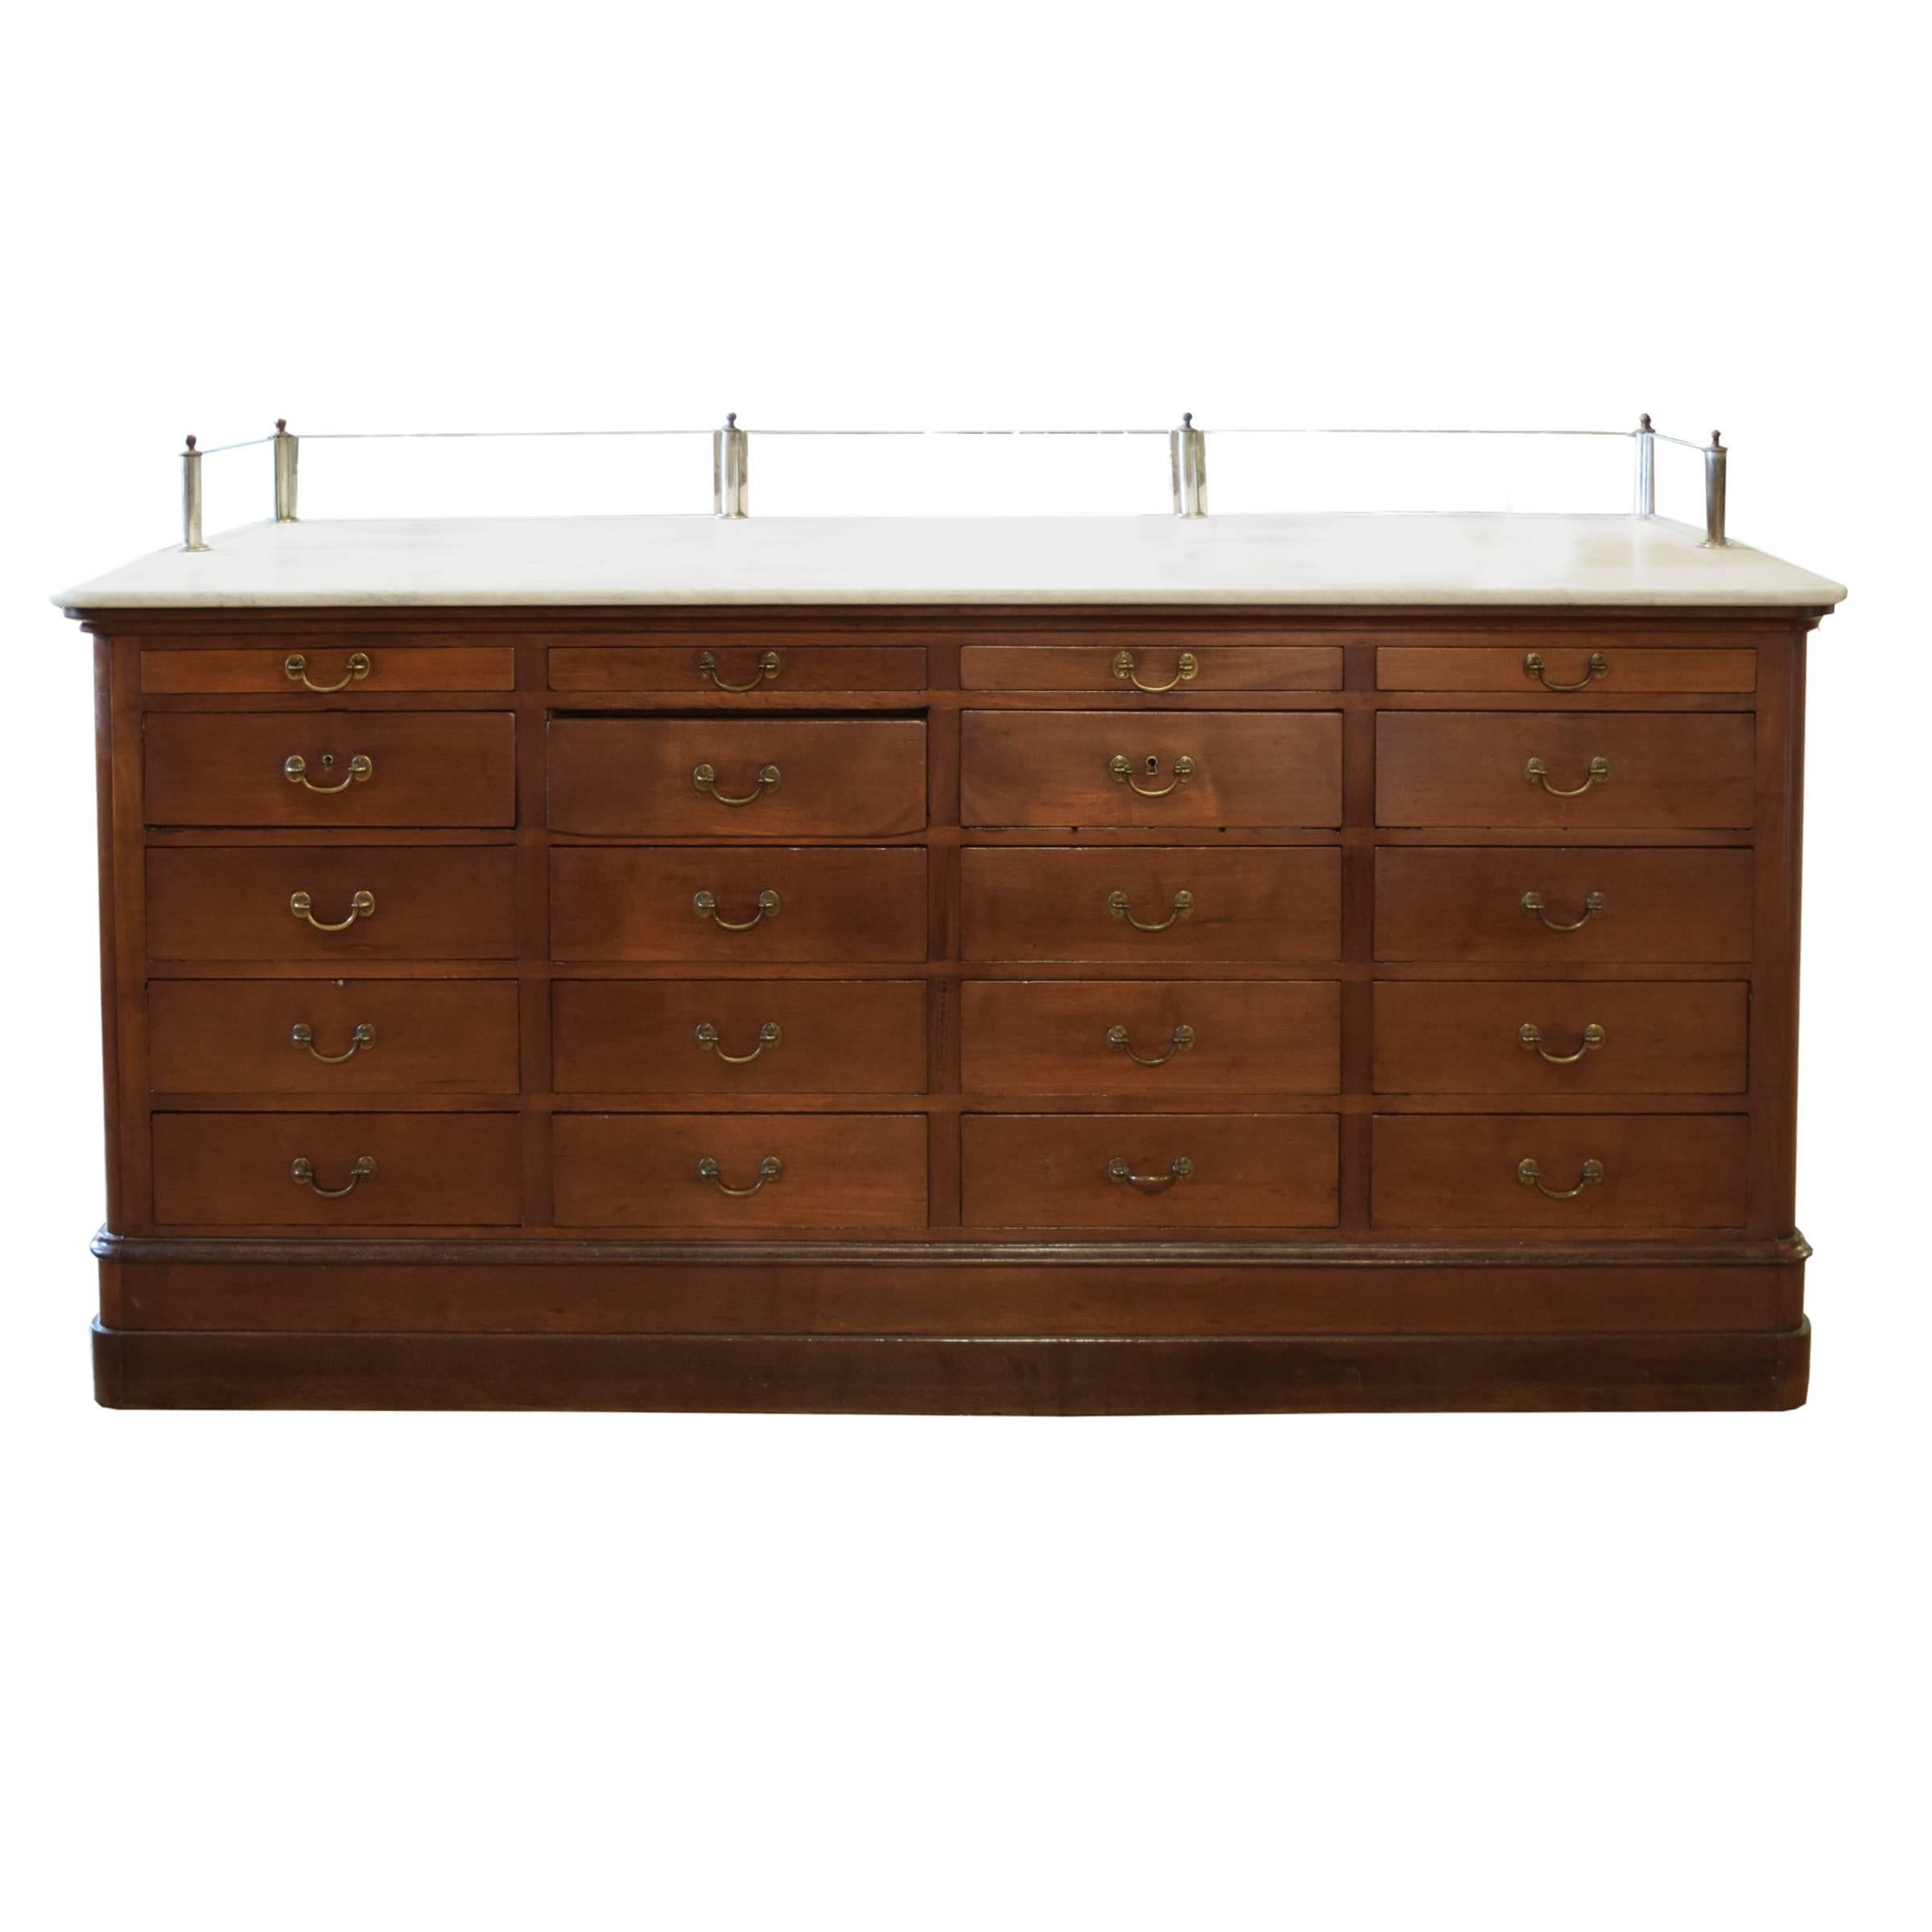 The best Italian wood shop counter with paneled sides, three locking front glass doors, 20 drawers with brass handles and a glass rail along three sides of the counter's marble top.

Counter height is 38